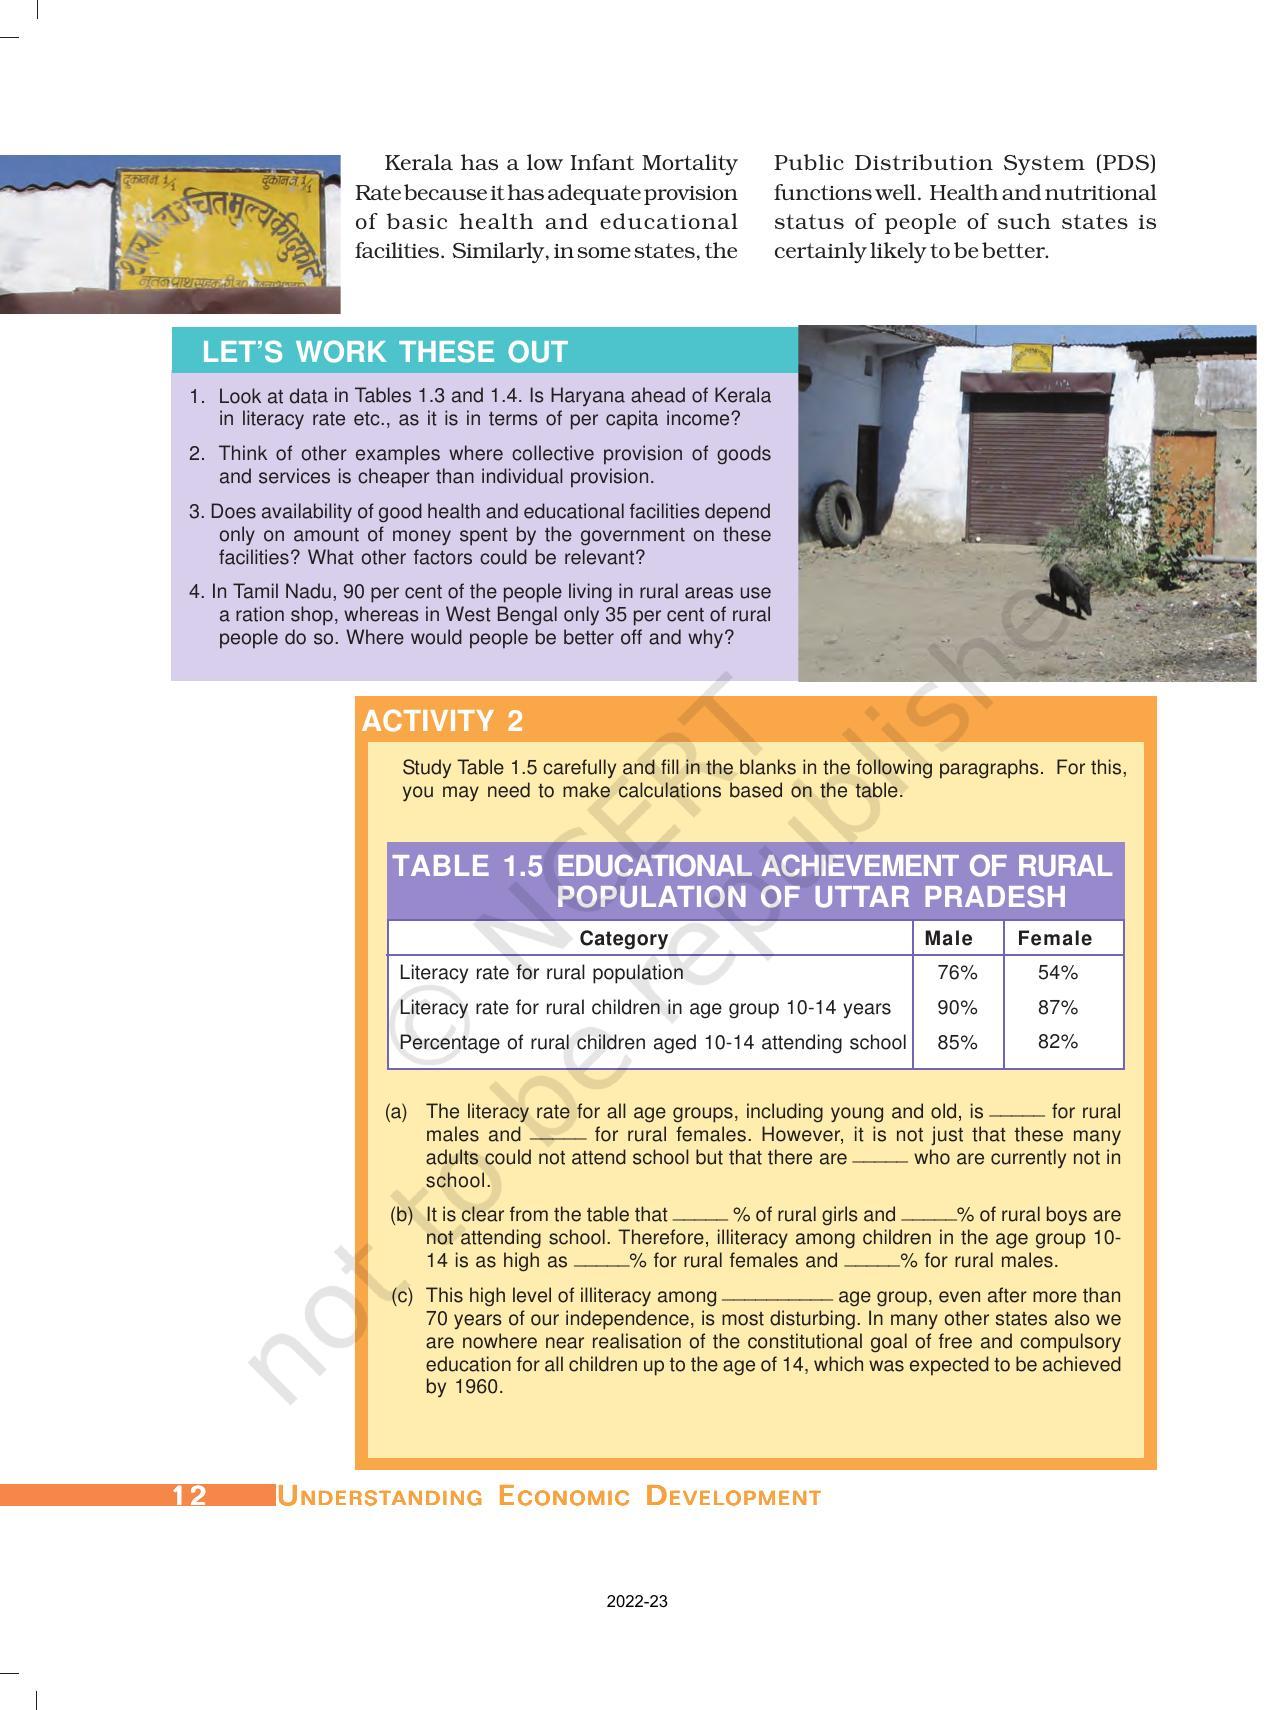 NCERT Book for Class 10 Economics Chapter 1 Development - Page 11